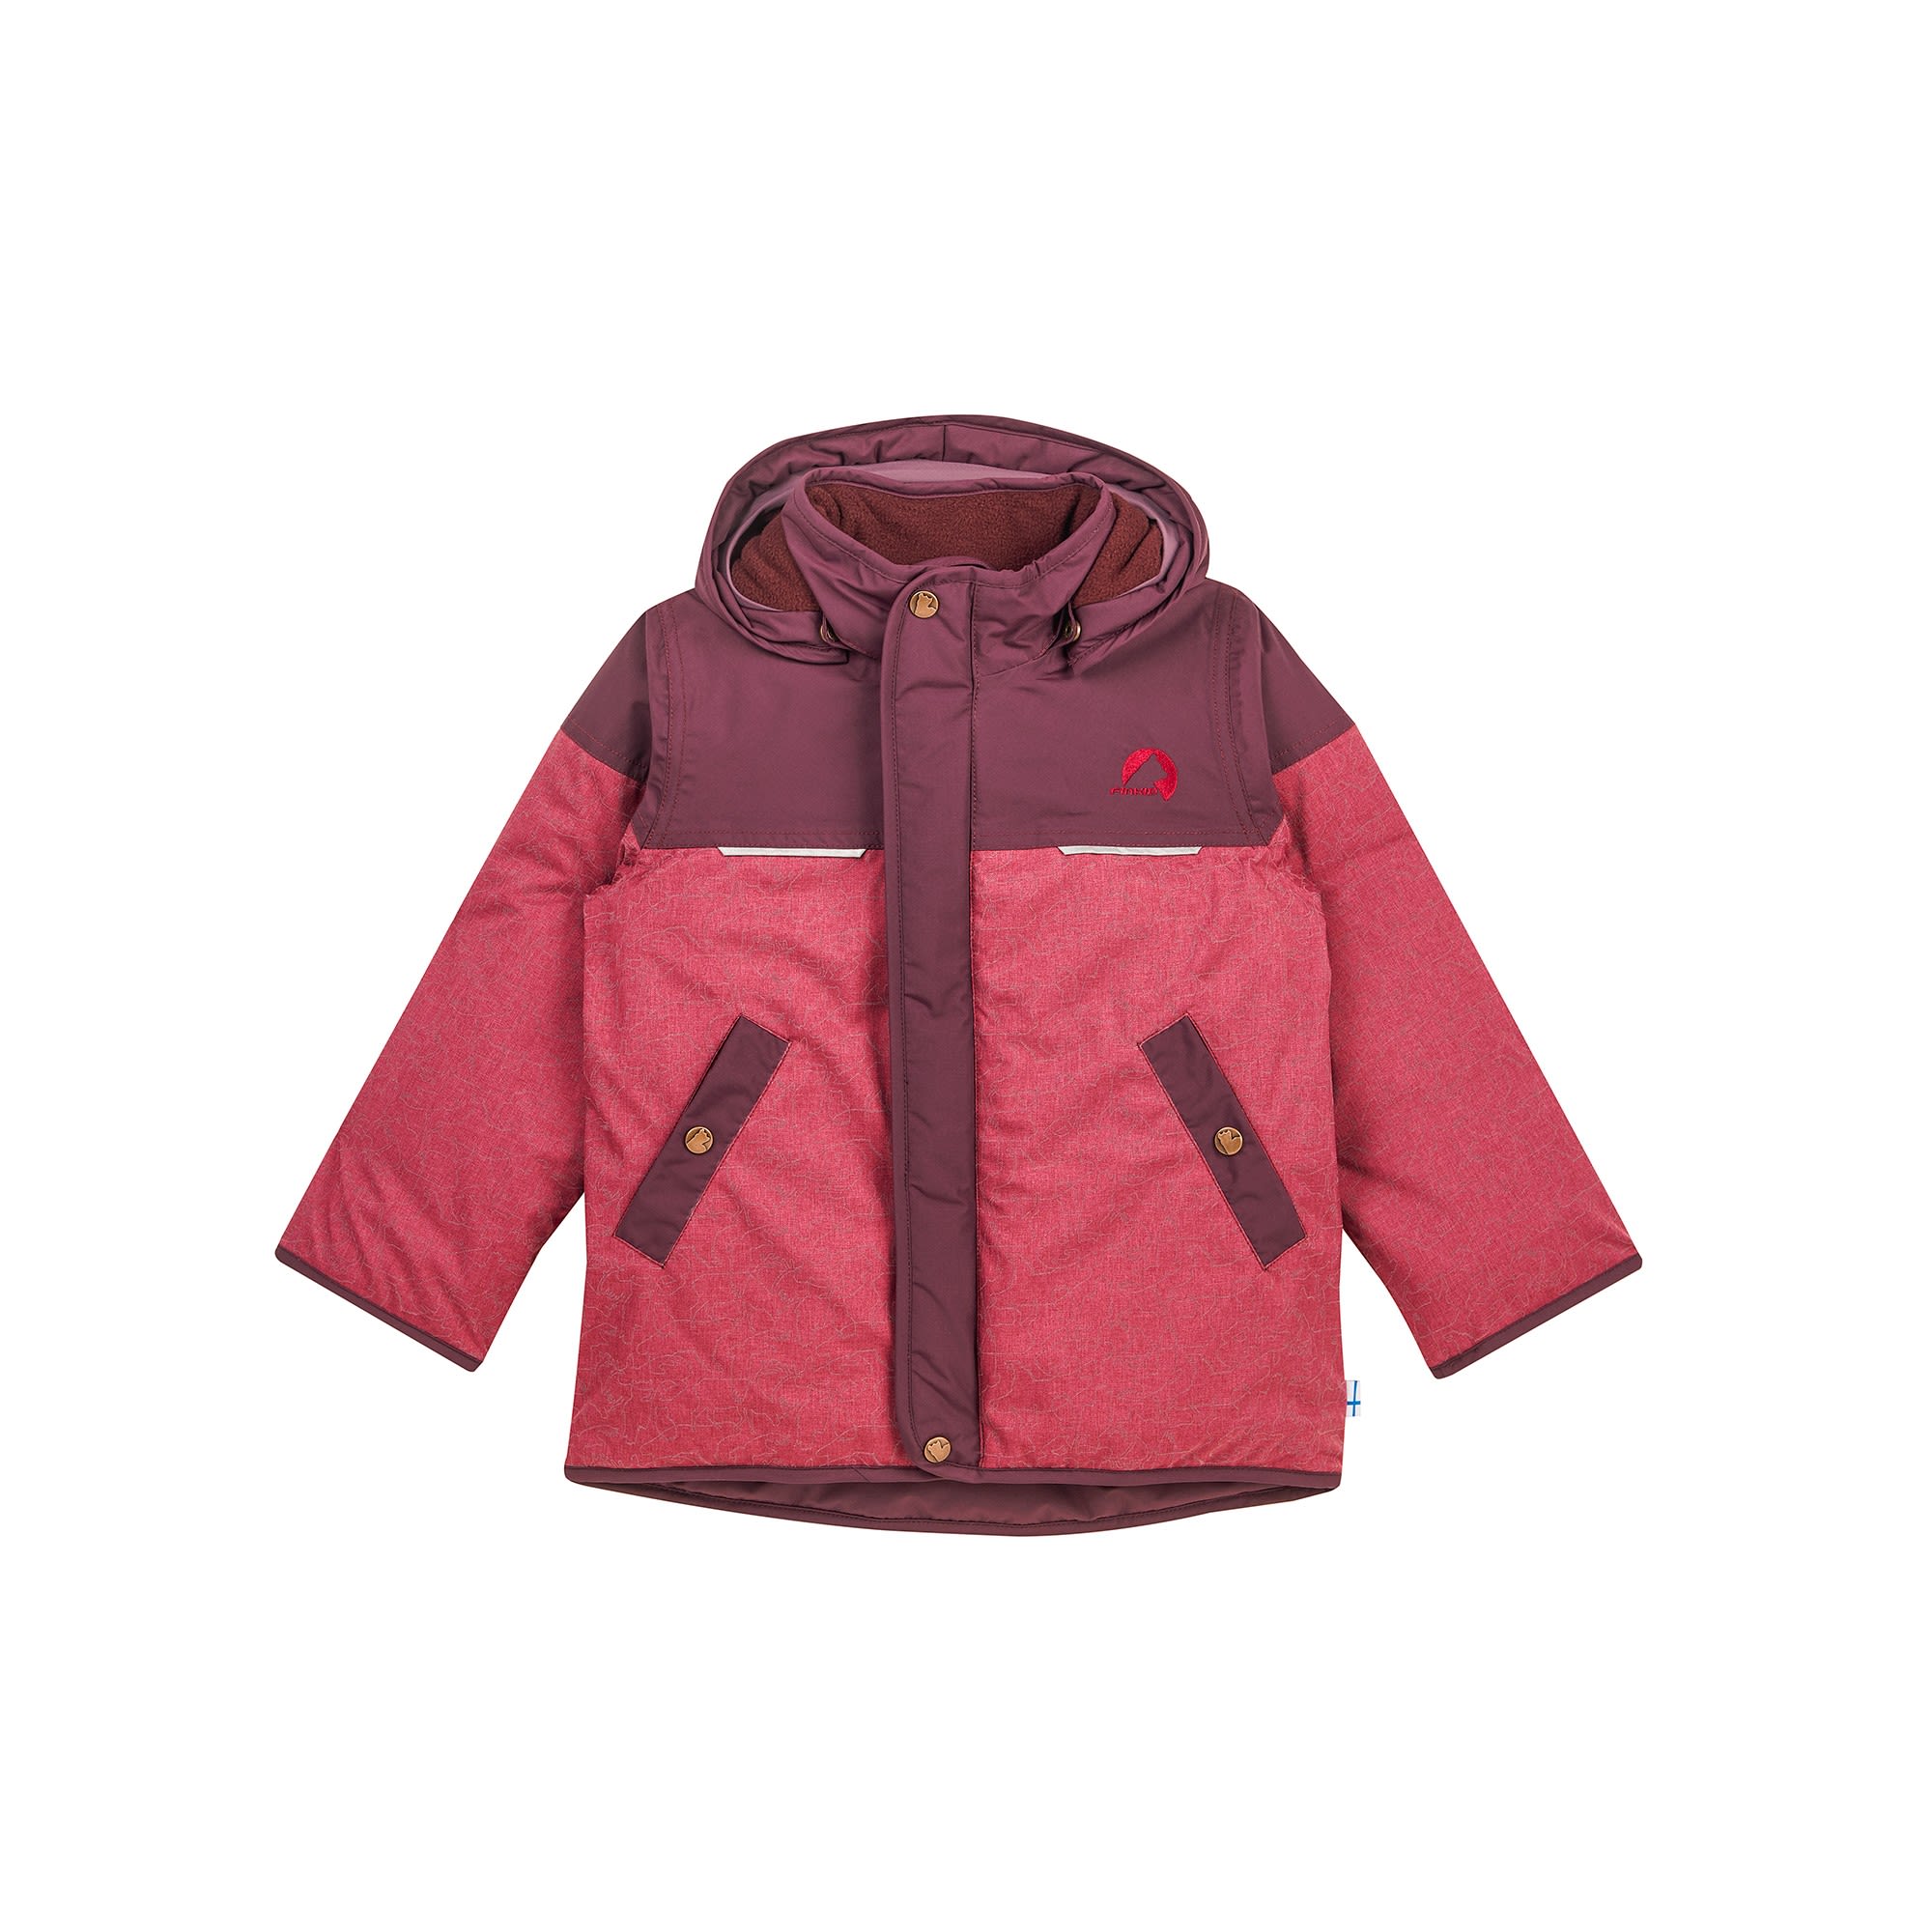 Finkid Koira Ice (Vorgngermodell) Colorblock - Rot- Anoraks- Grsse 80 - 90 - Farbe Beet Red - Eggplant